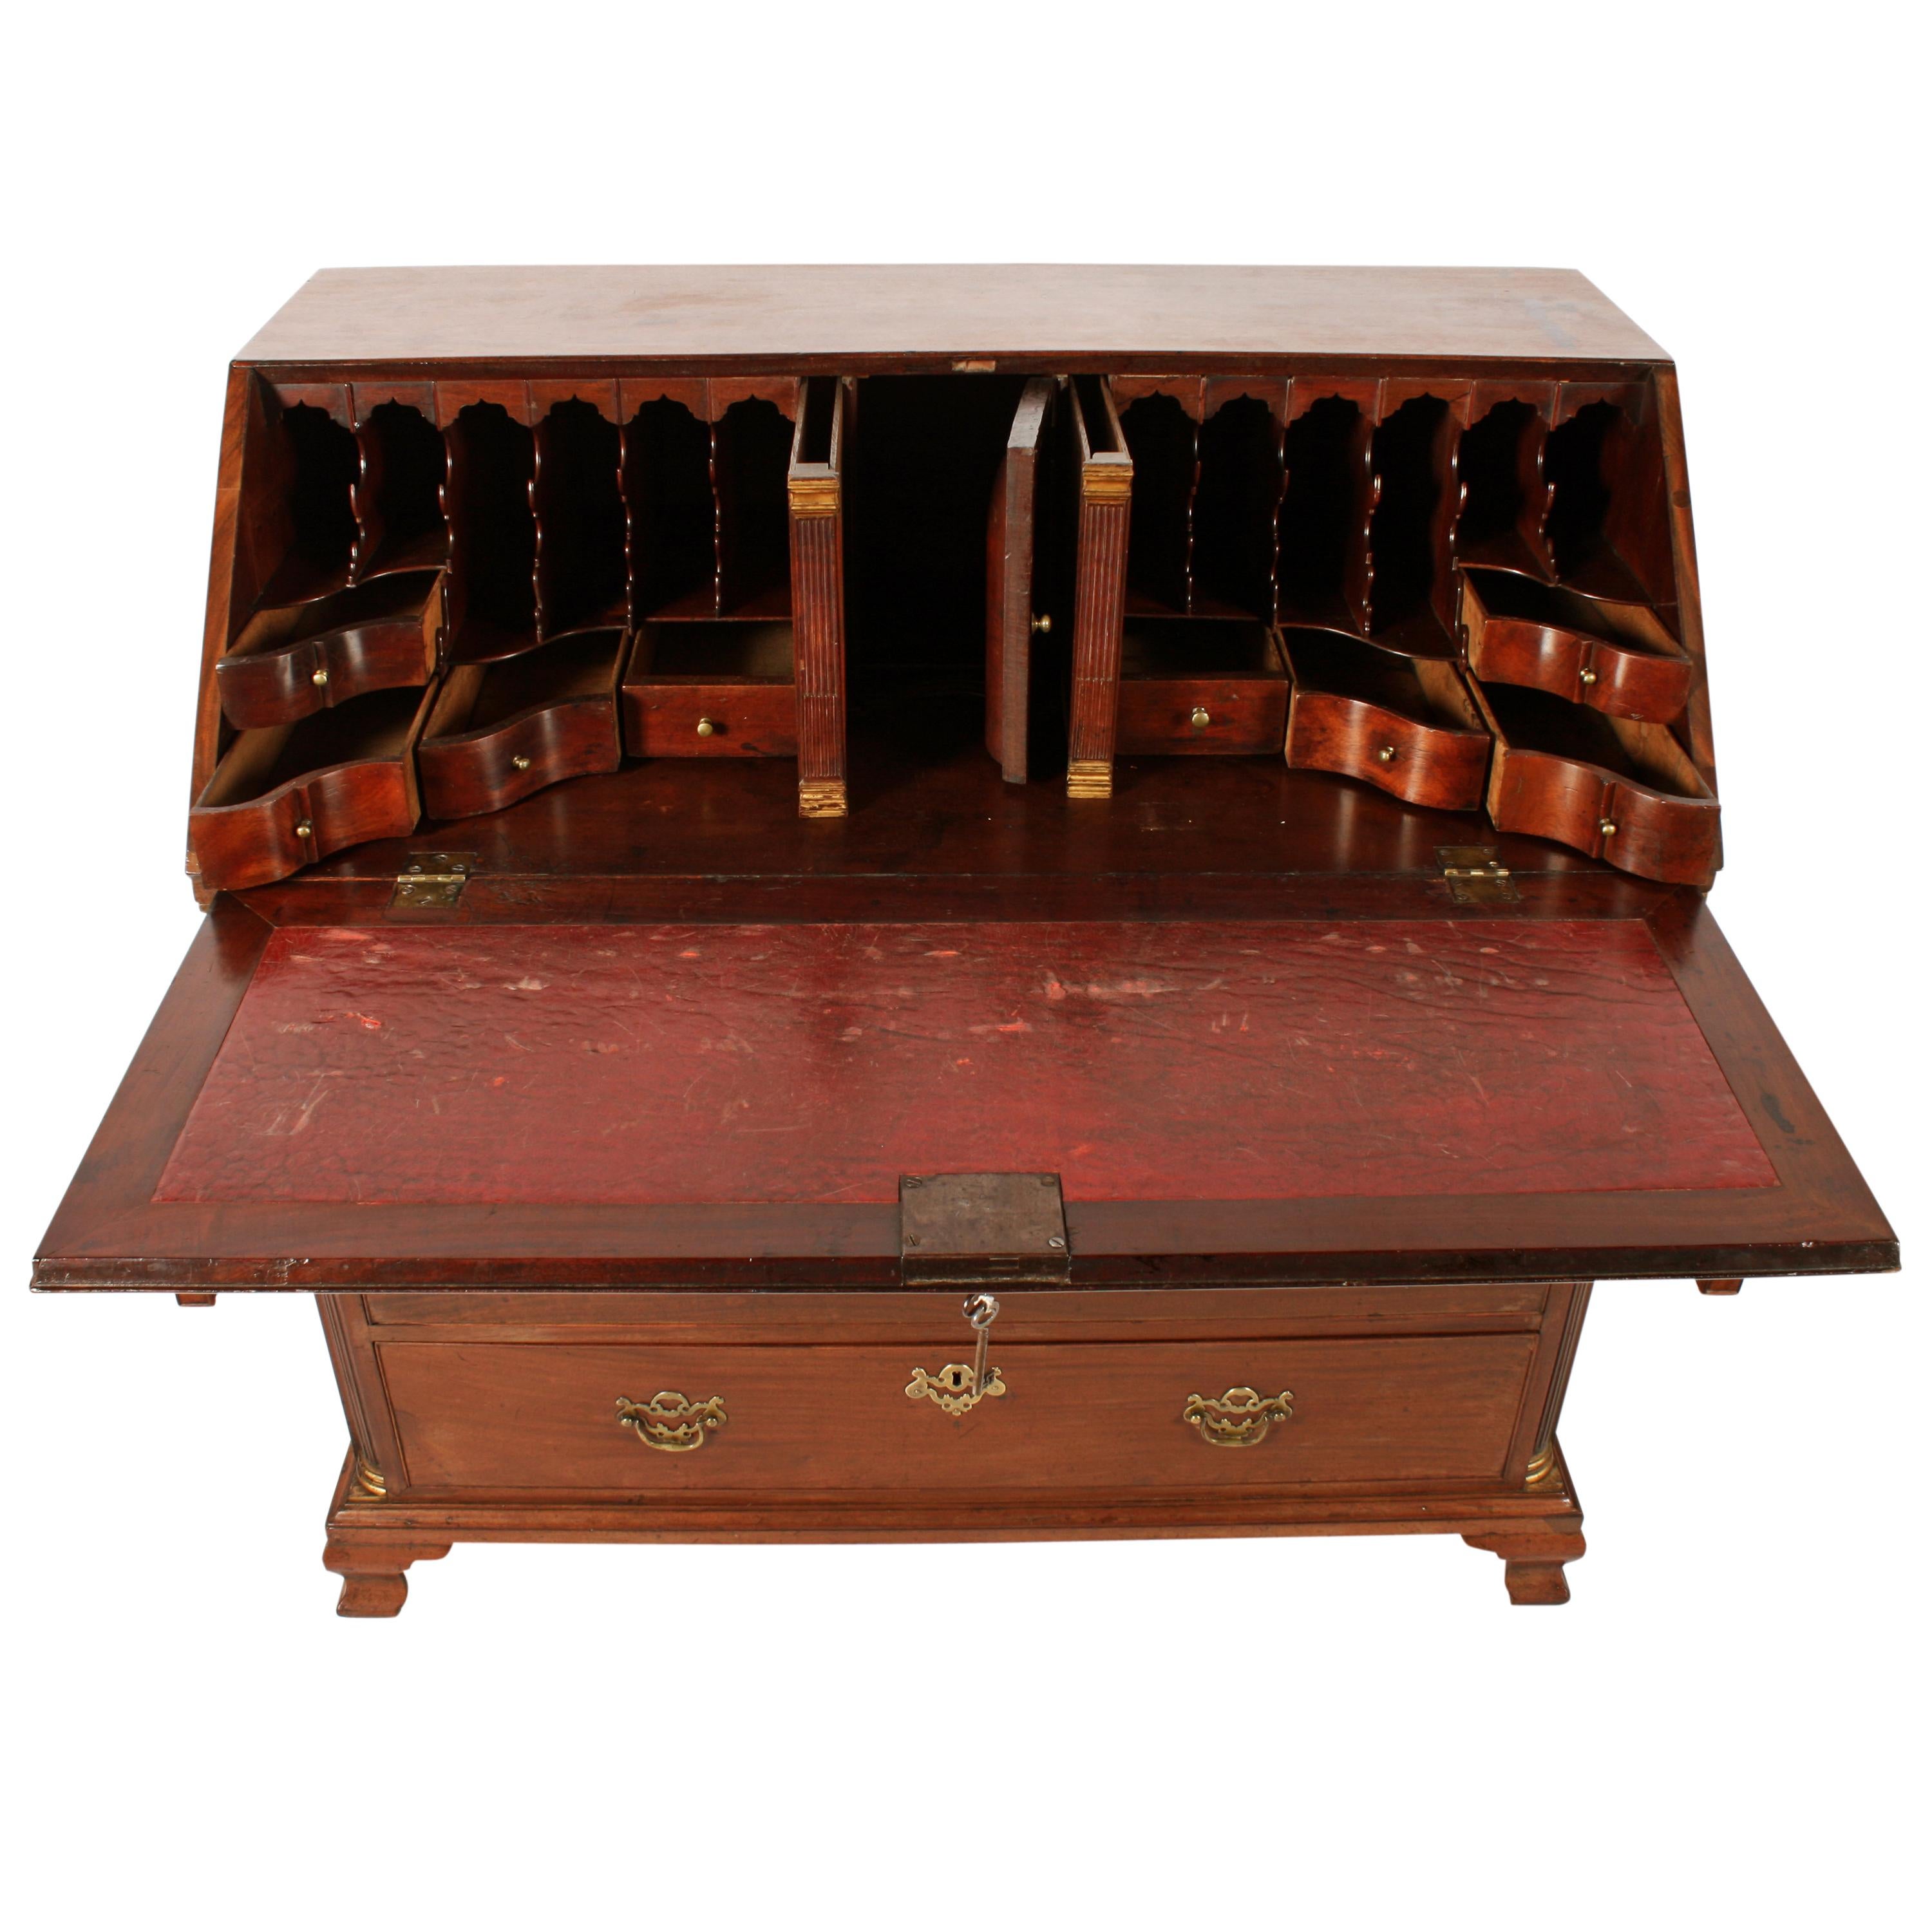 18th Century Chippendale Georgian Mahogany Bureau Desk In Good Condition For Sale In Newcastle Upon Tyne, GB